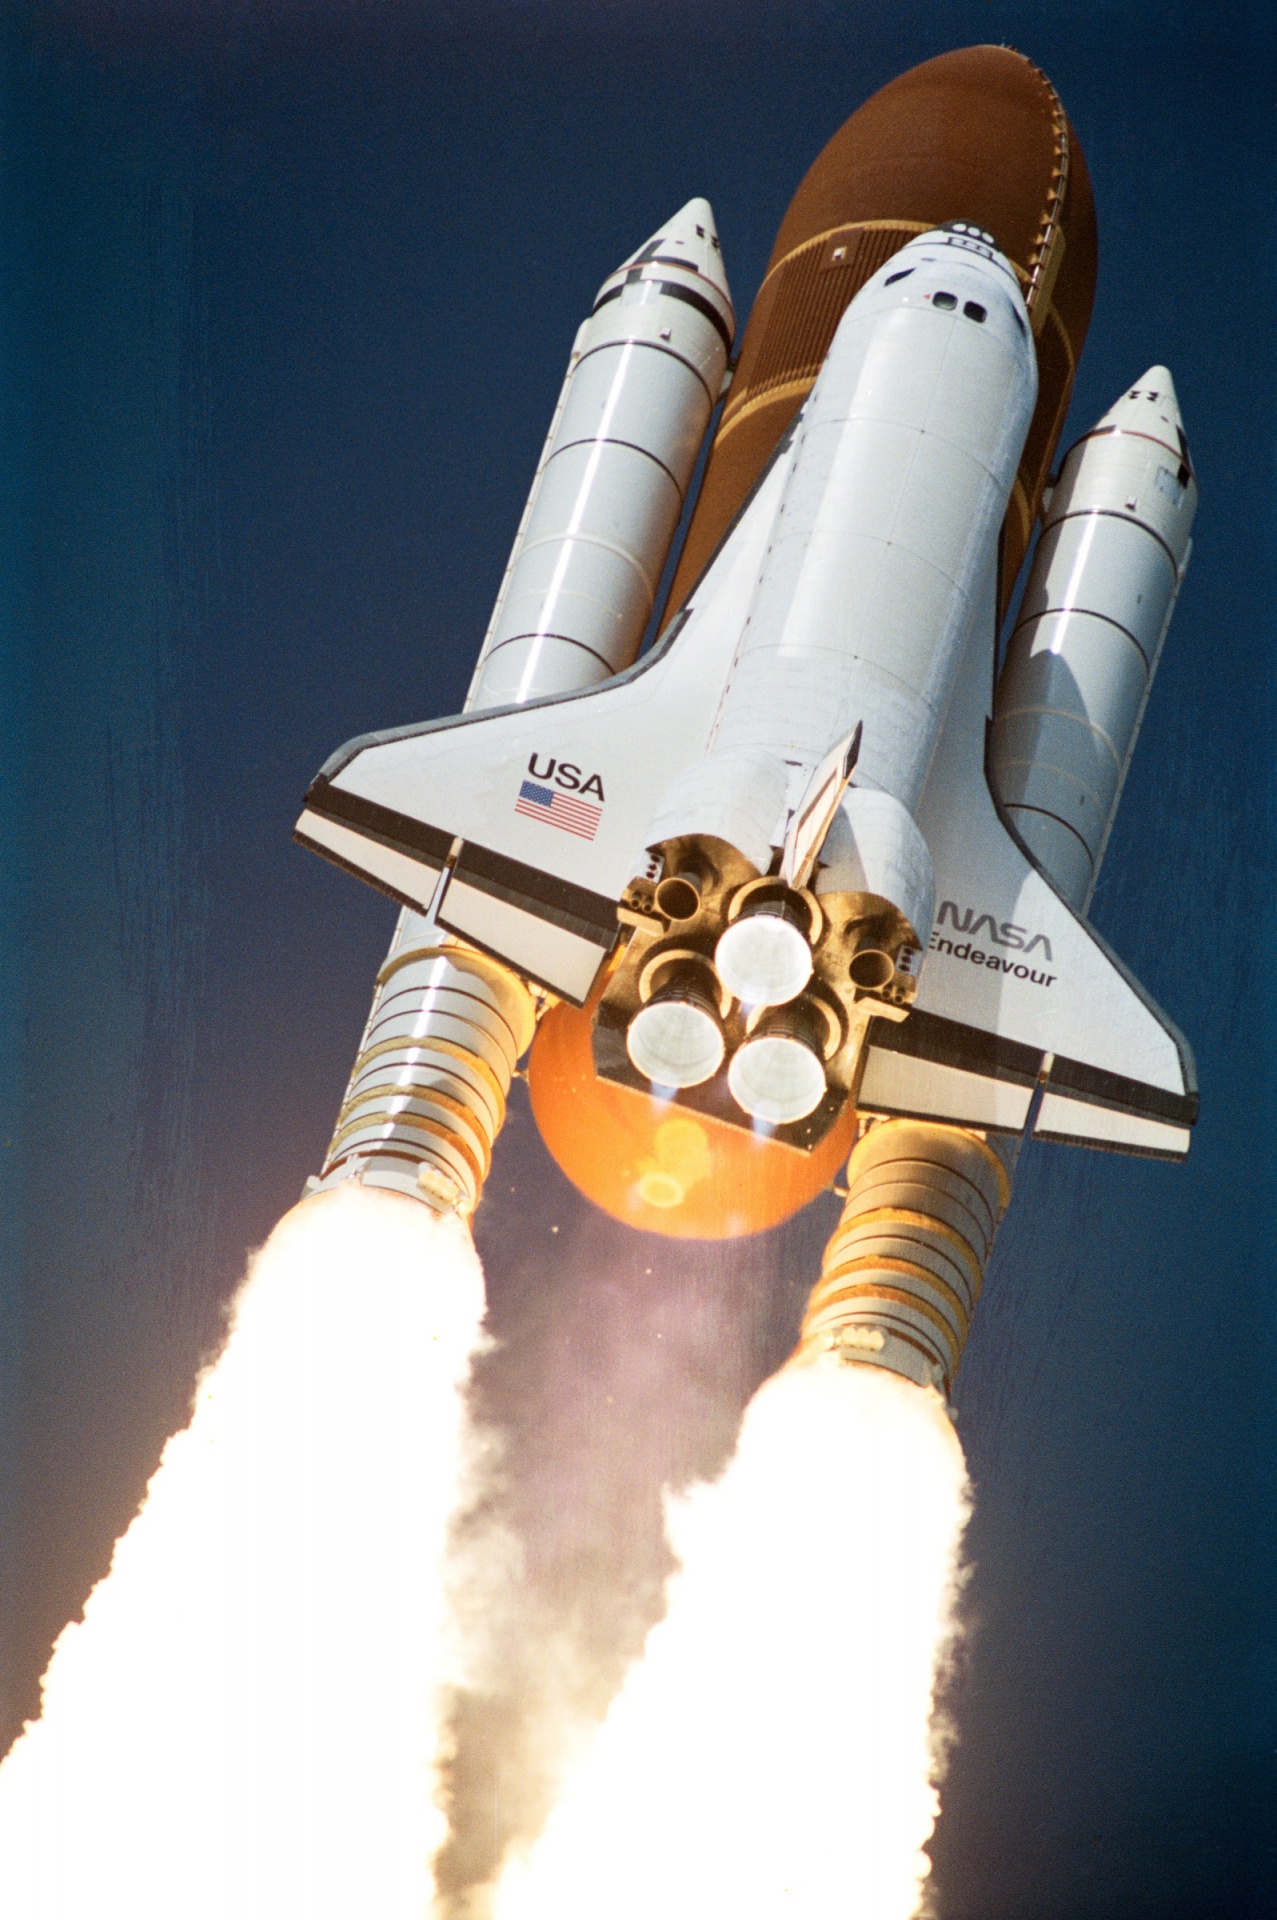 who was on the space shuttle endeavour